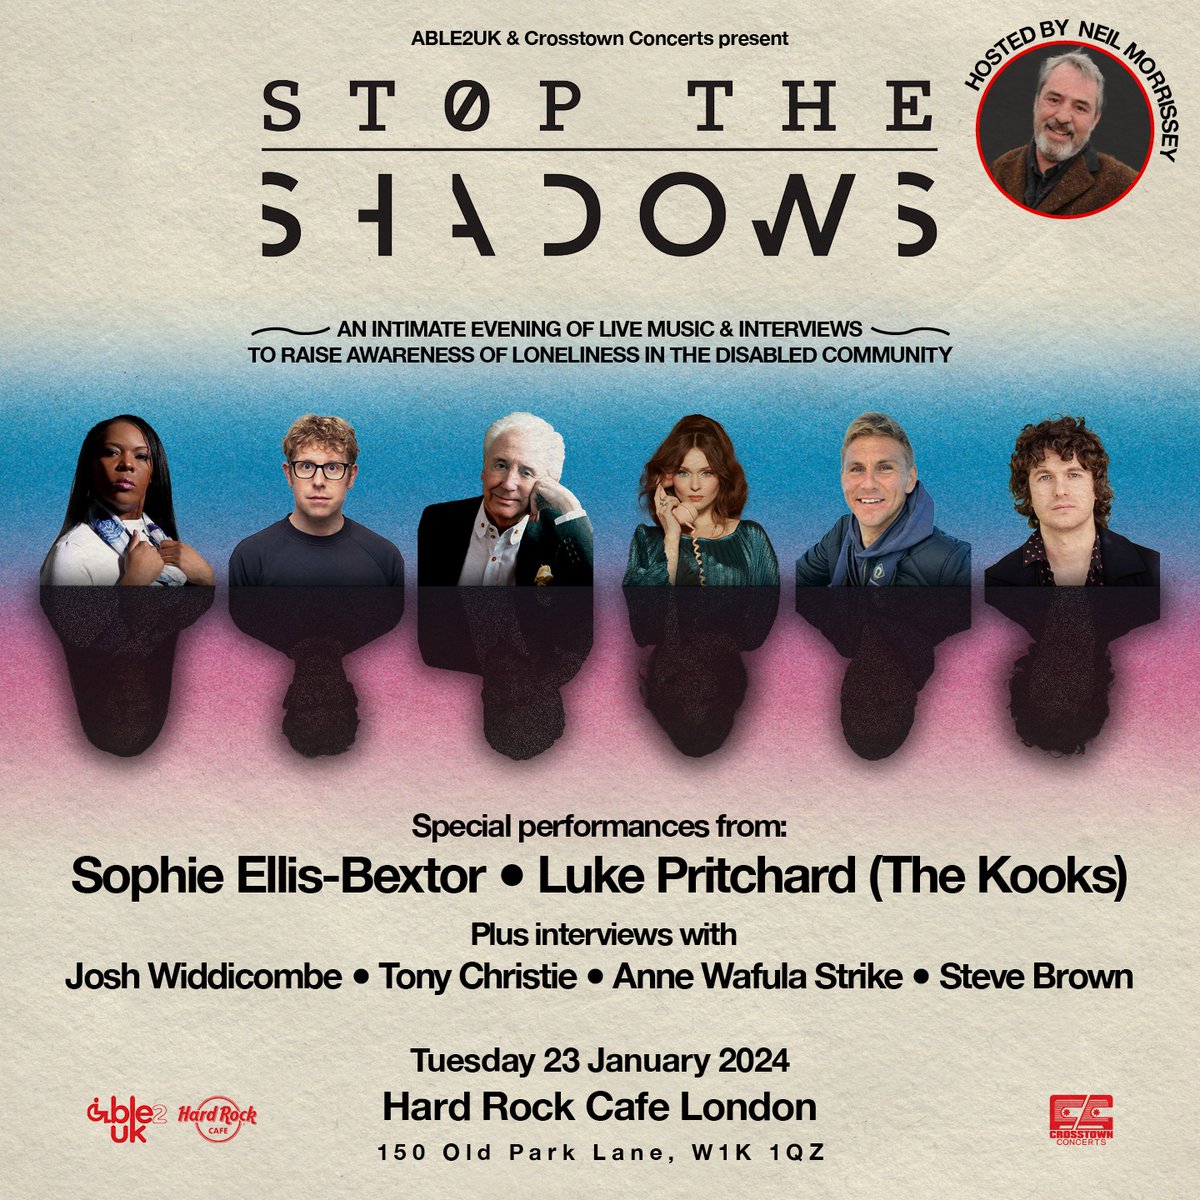 .@SophieEB, @thekooksmusic’s Luke Pritchard, Josh Widdicombe, @Anne_W_Strike and more will be at @able2uk’s #StopTheShadows night at the Hard Rock Café #London tonight